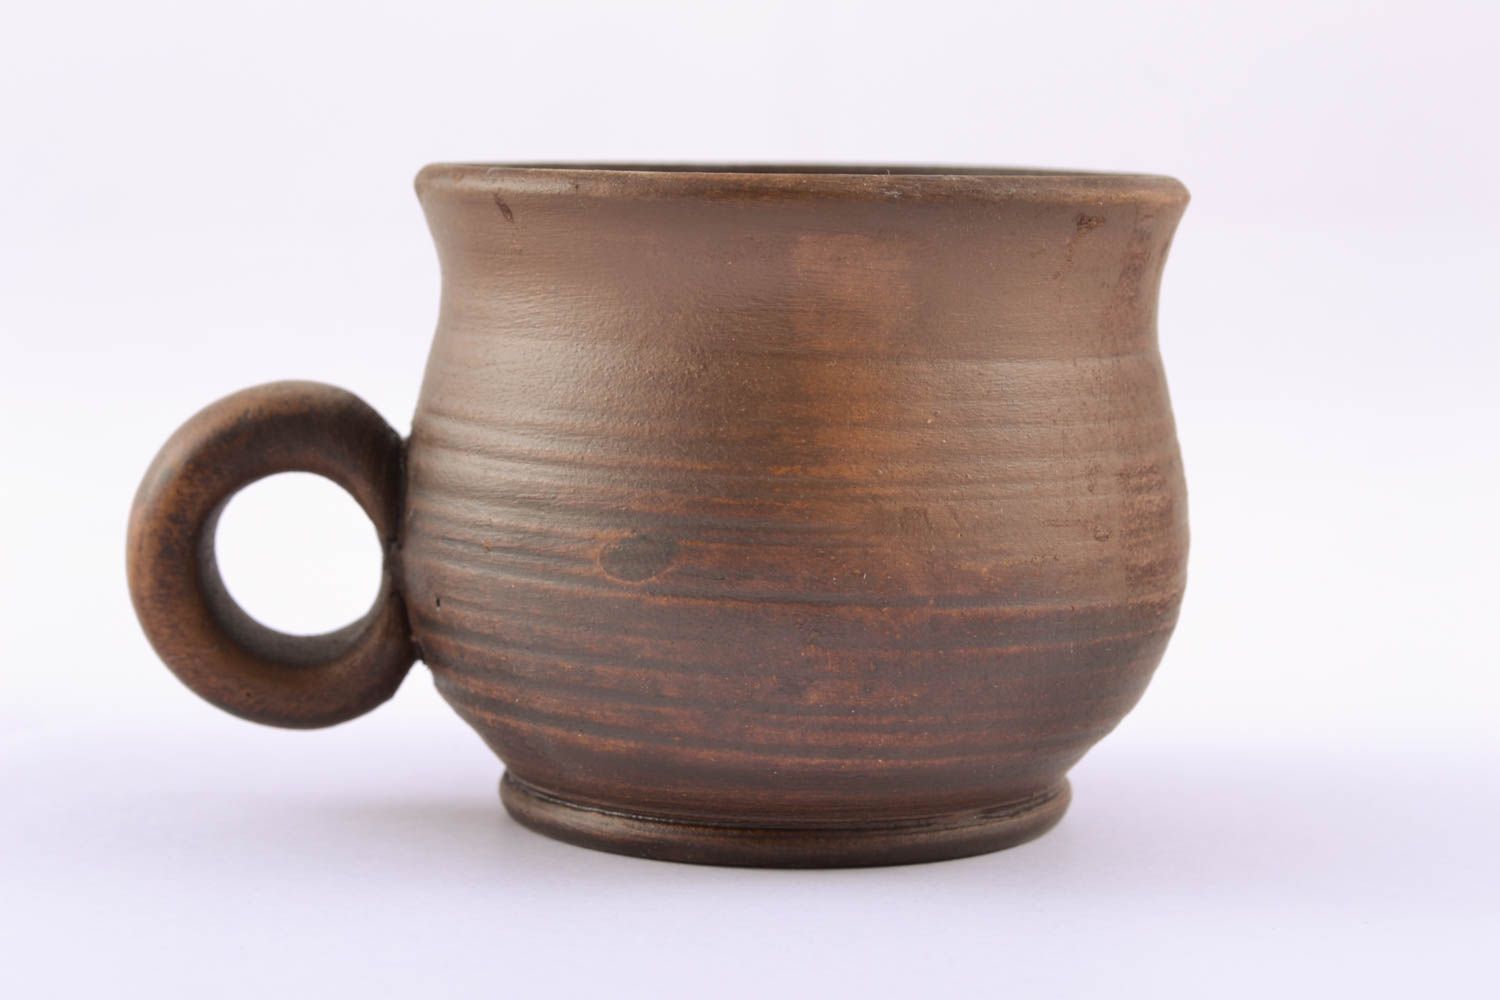 Rustic ceramic teacup in brown color with handle and no pattern photo 1